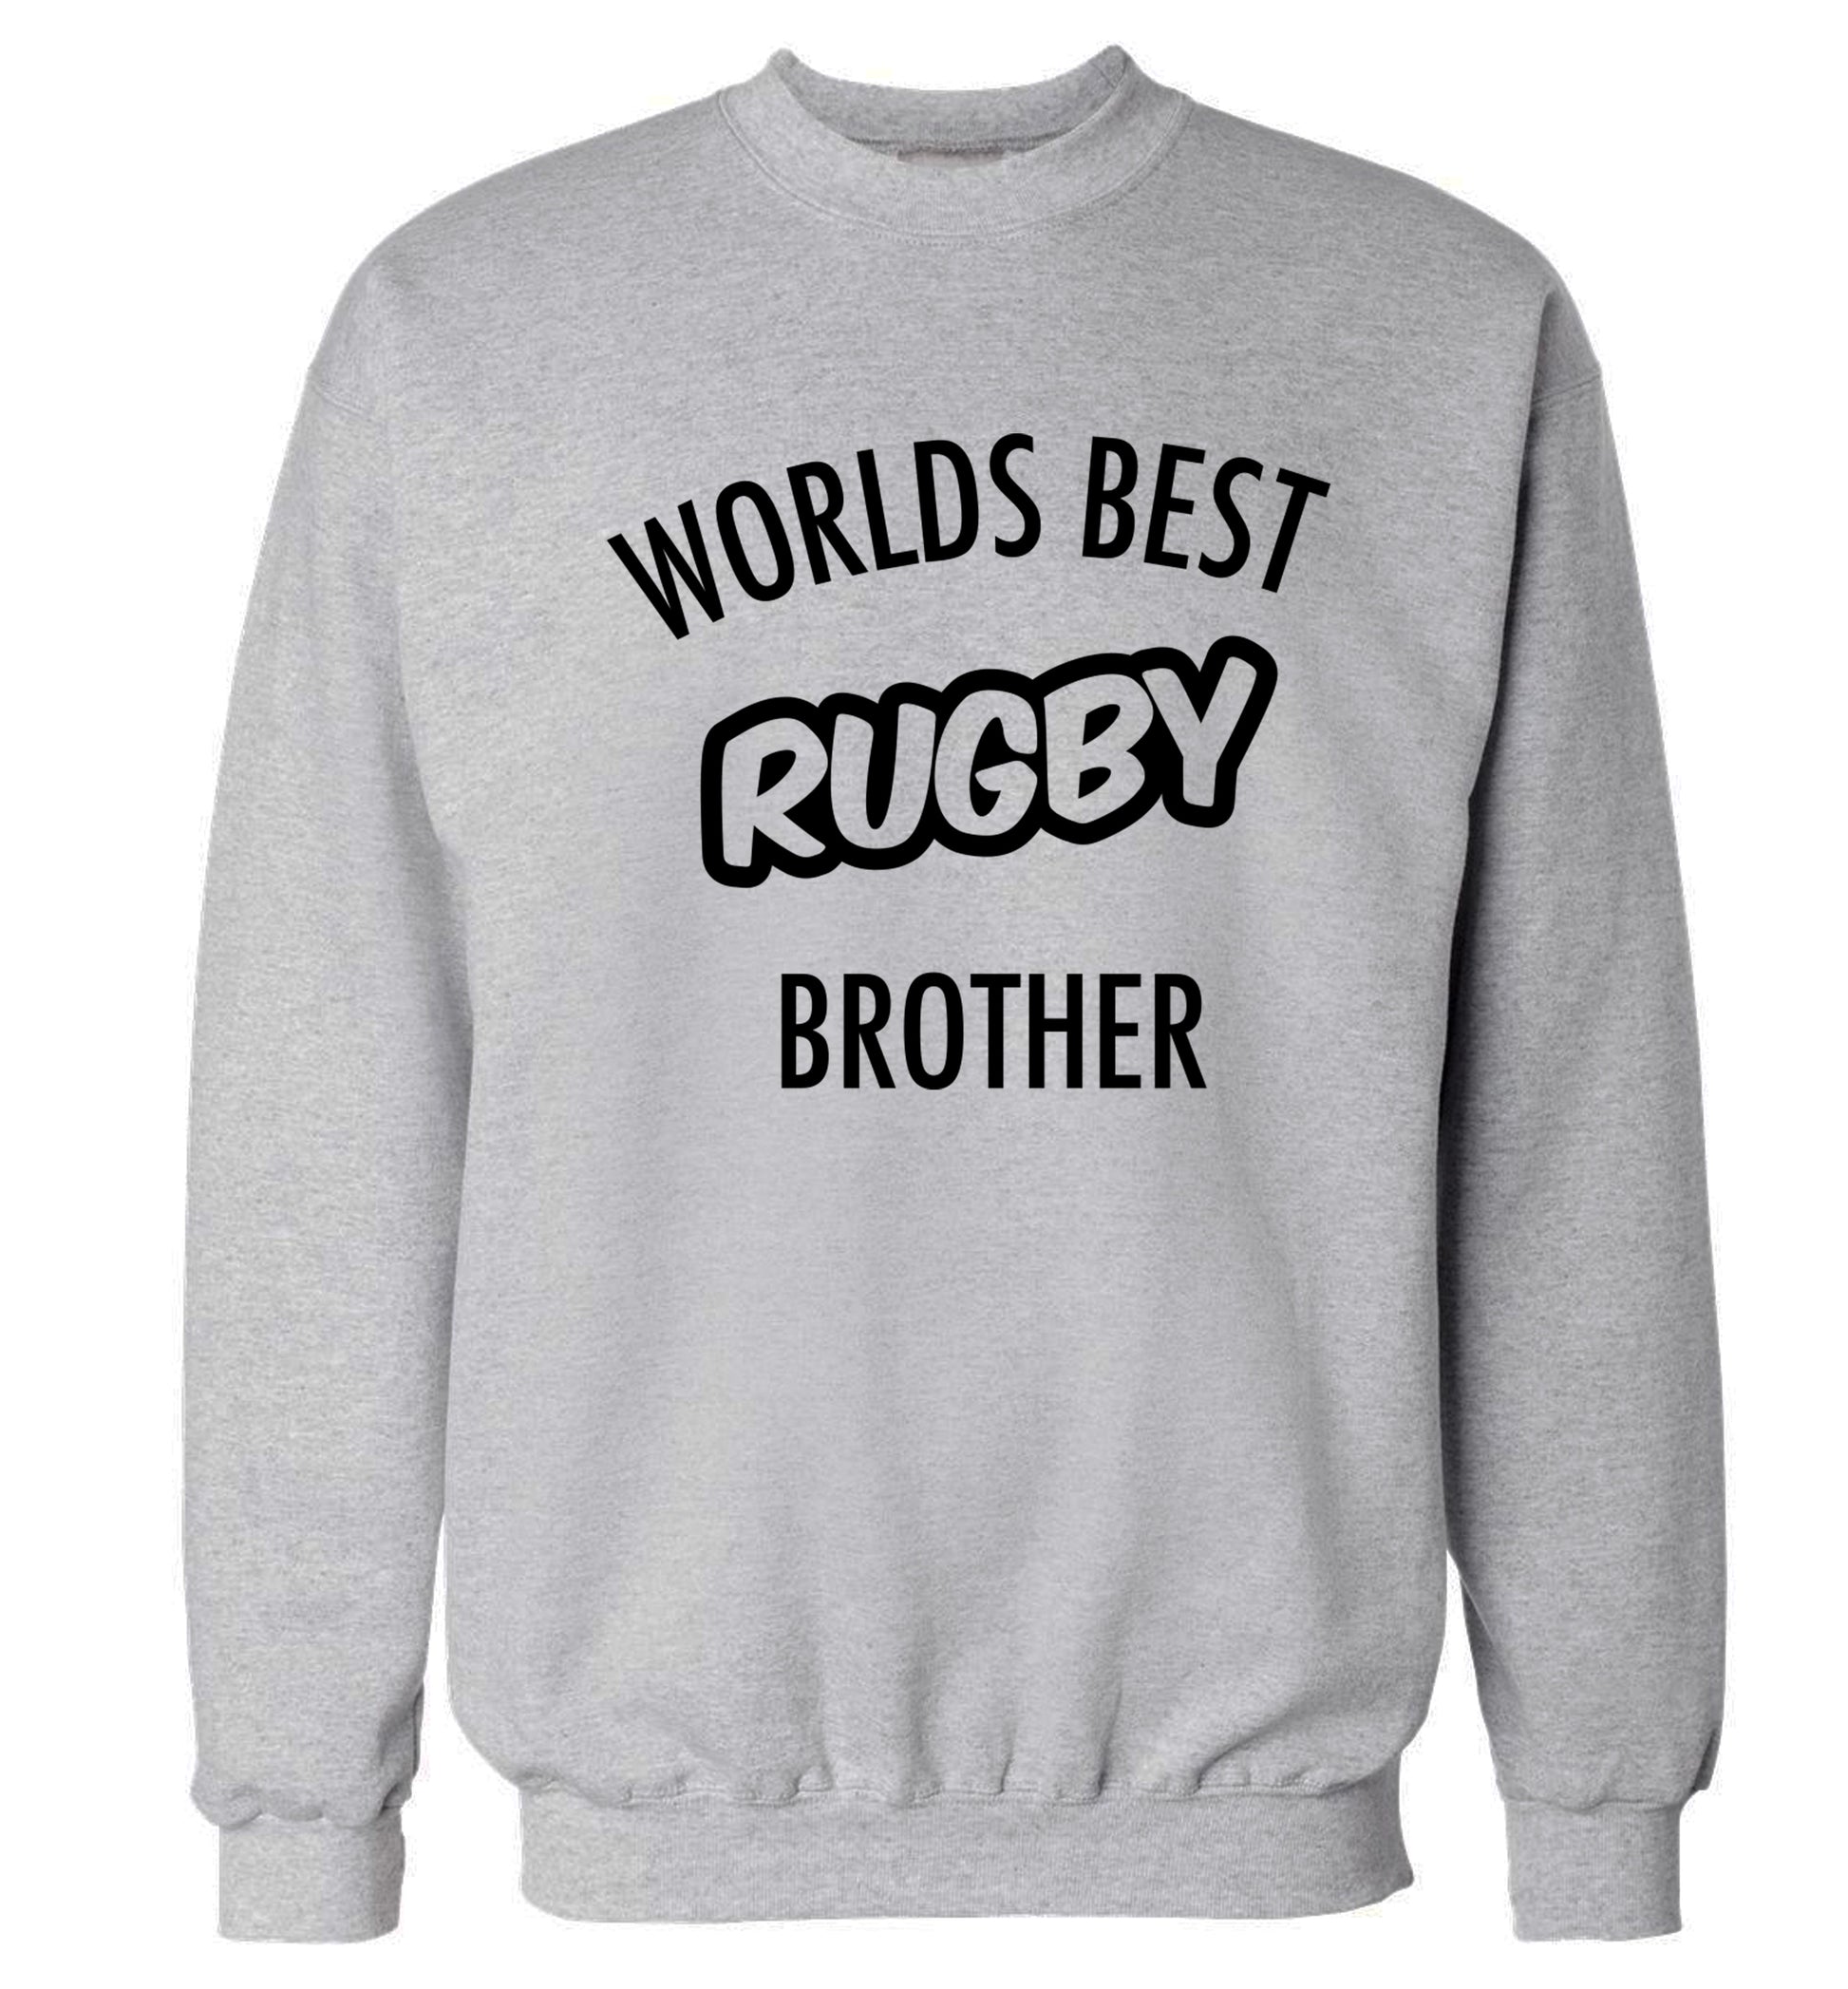 Worlds best rugby brother Adult's unisex grey Sweater 2XL